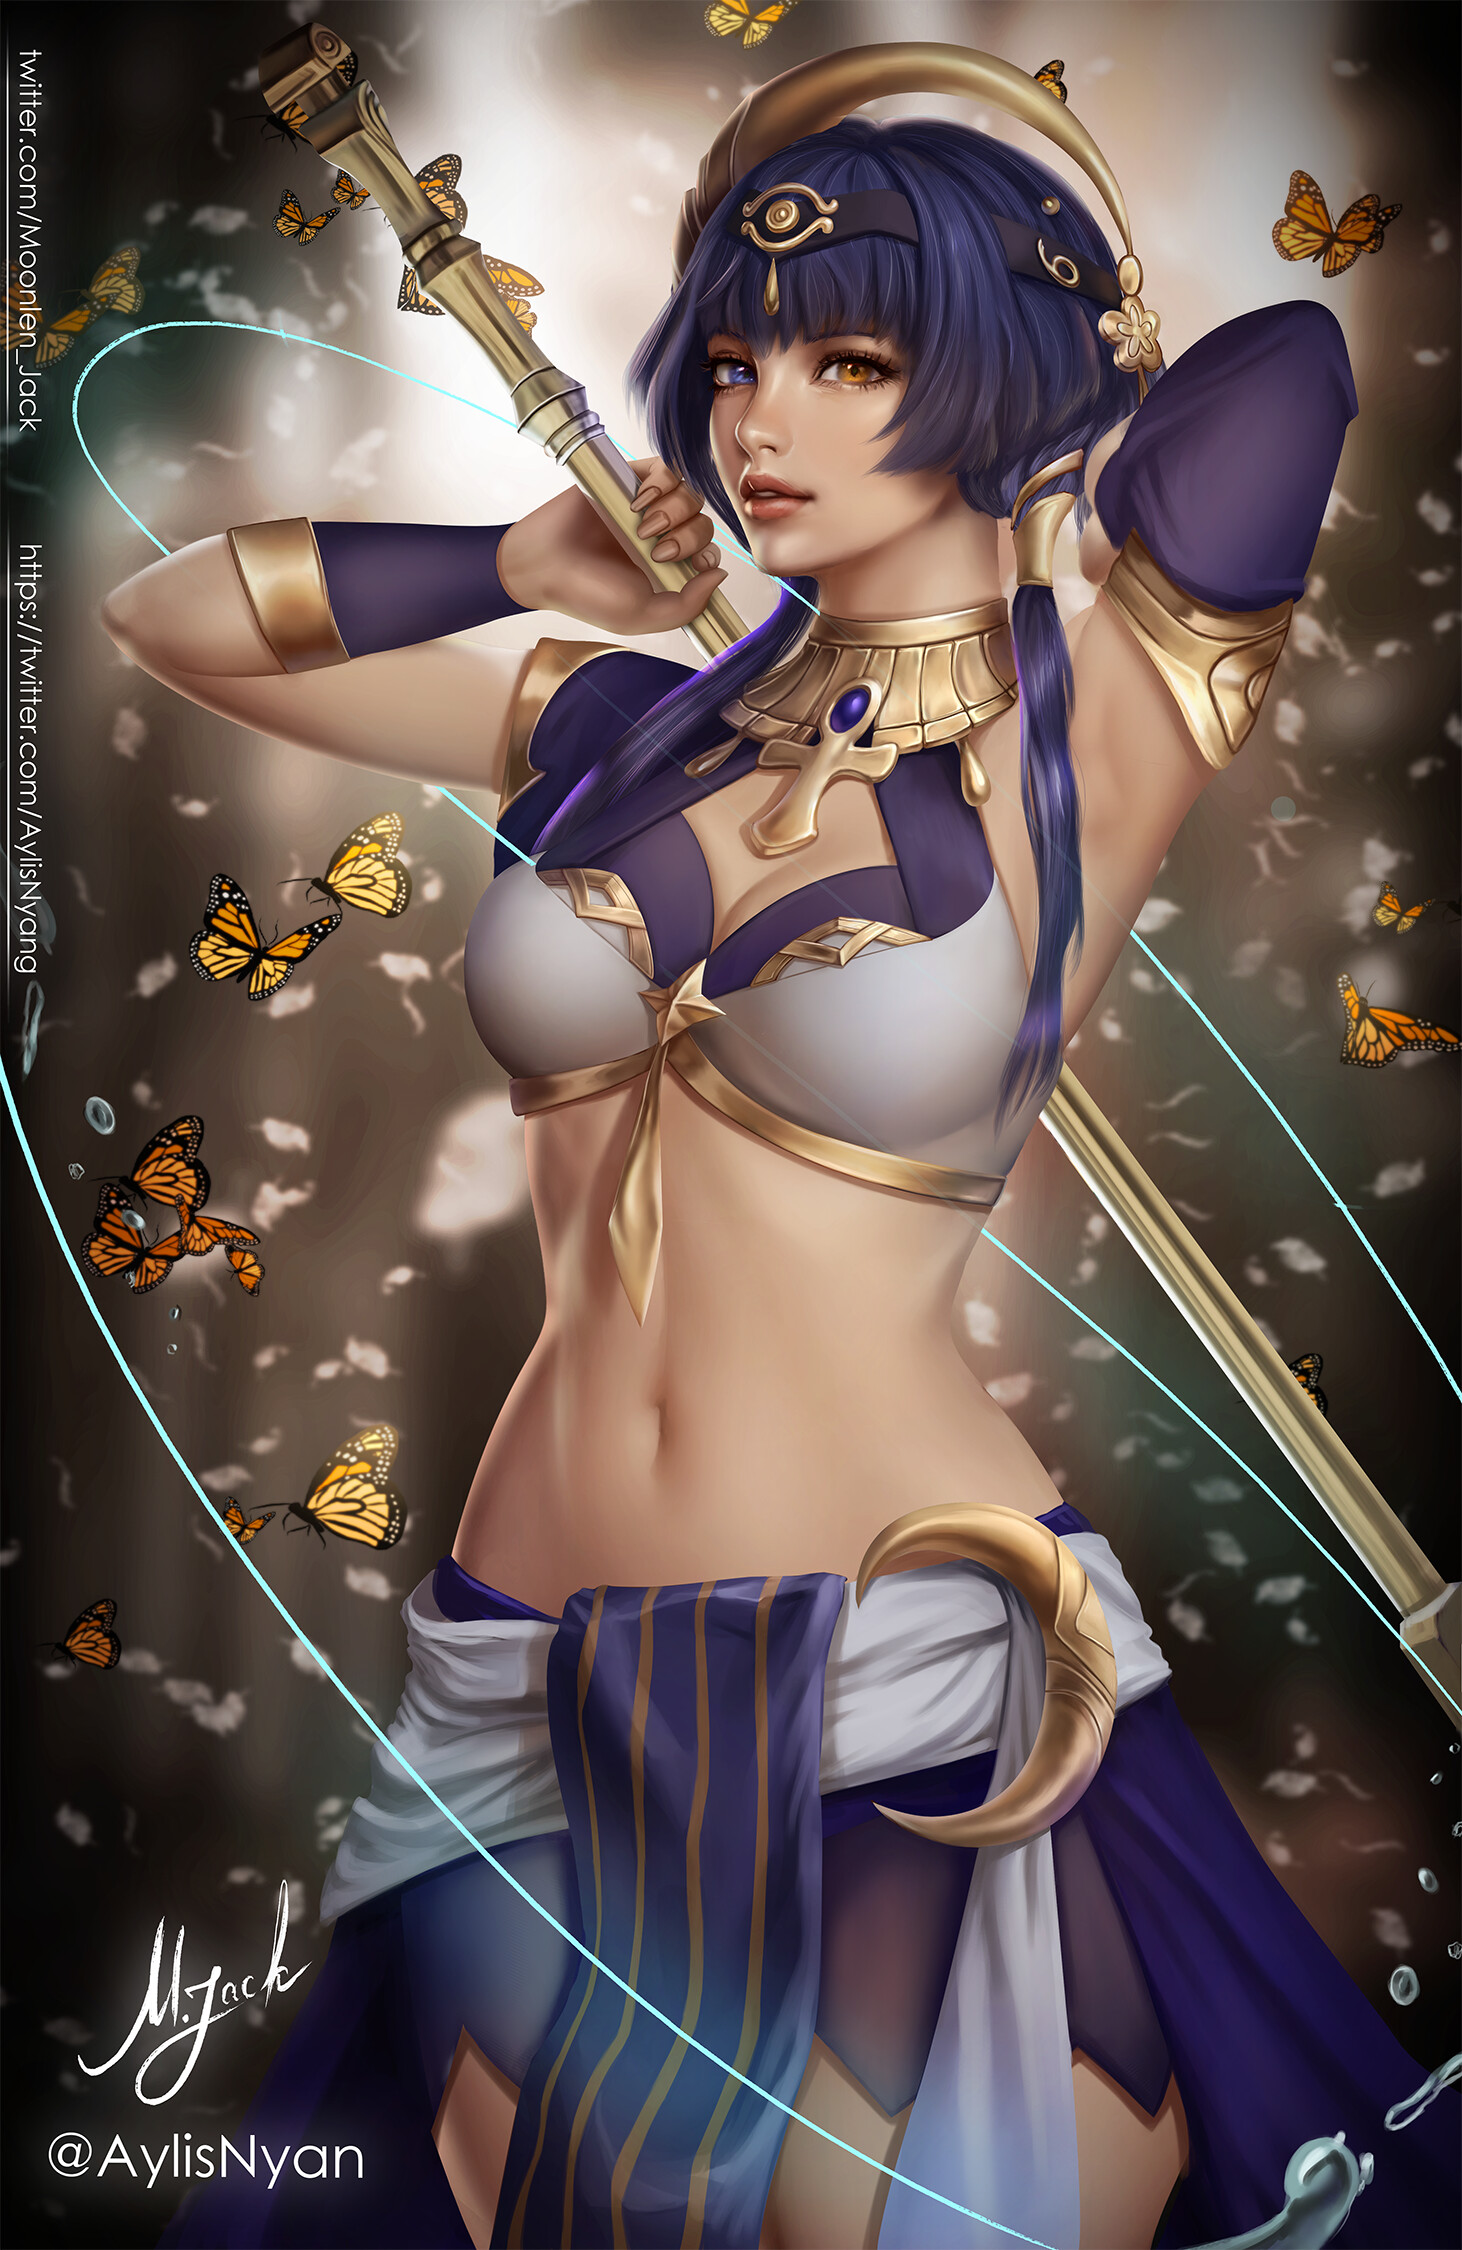 Moonlen Jack Drawing Blue Hair Short Hair Twintails Bangs Blue Clothing Gold Egyptian Butterfly Hete 1462x2250